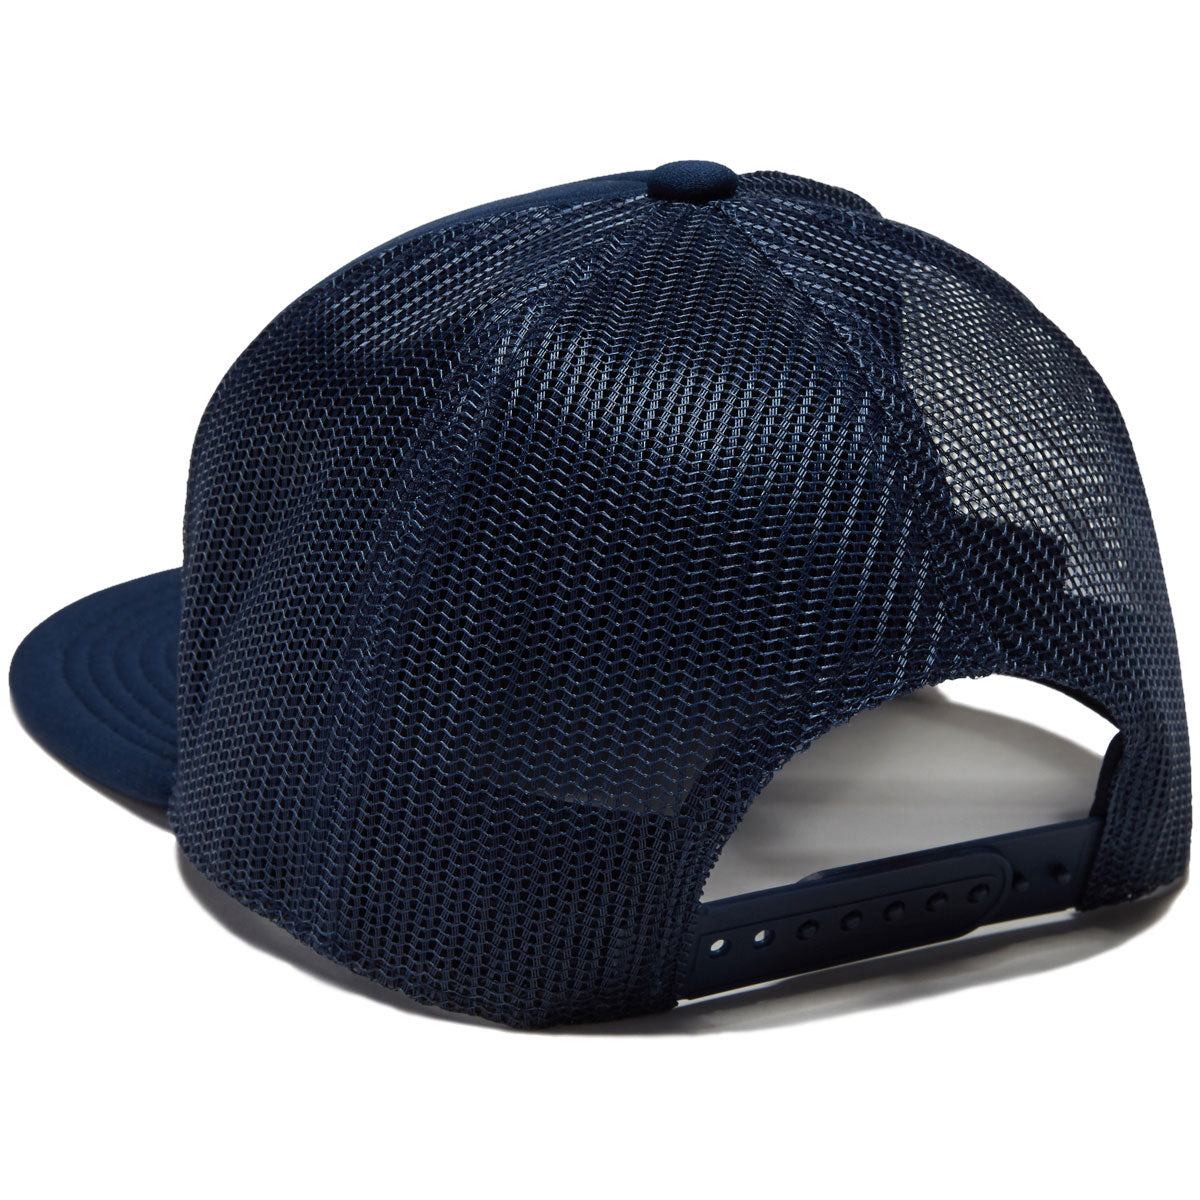 Brixton Bass Brains Boat Hp Trucker Hat - Washed Navy image 2